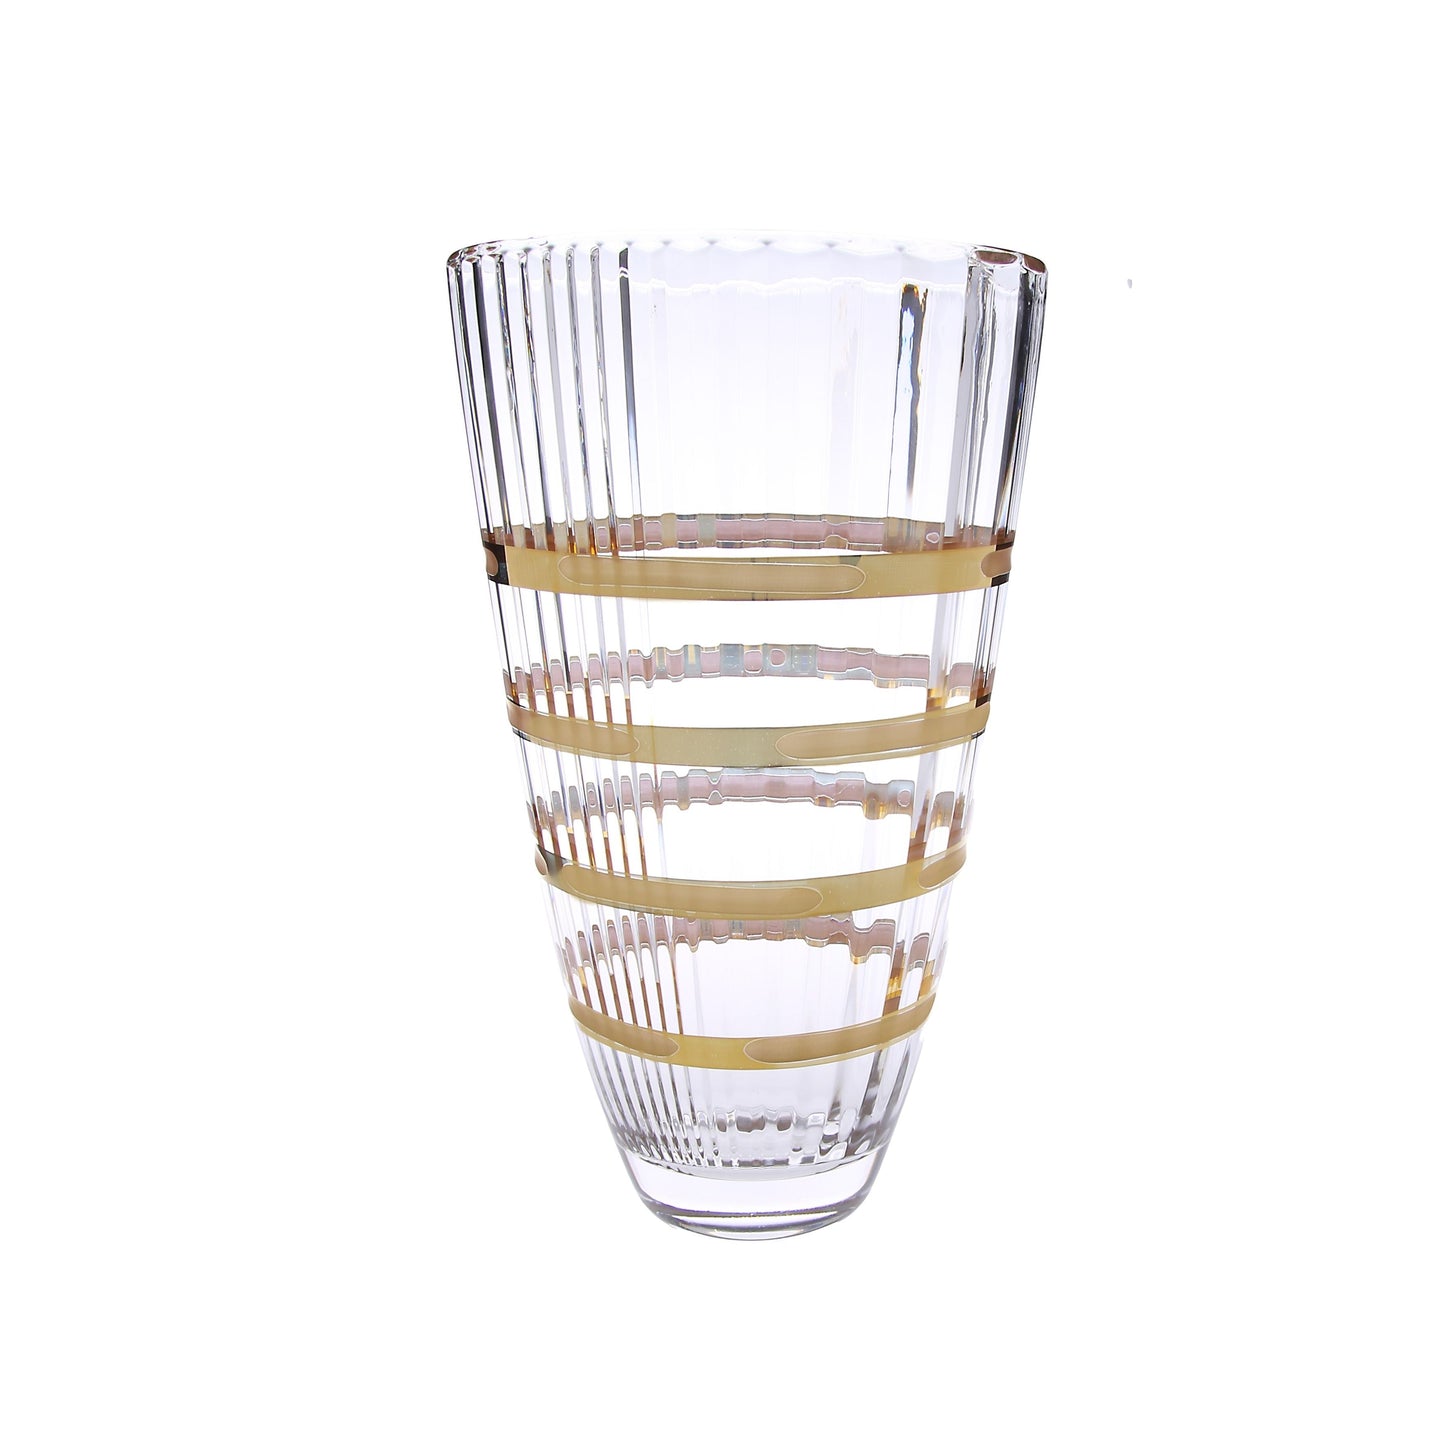 Classic Touch Decor Glass Vase With 14K Gold Brick Design, 12"